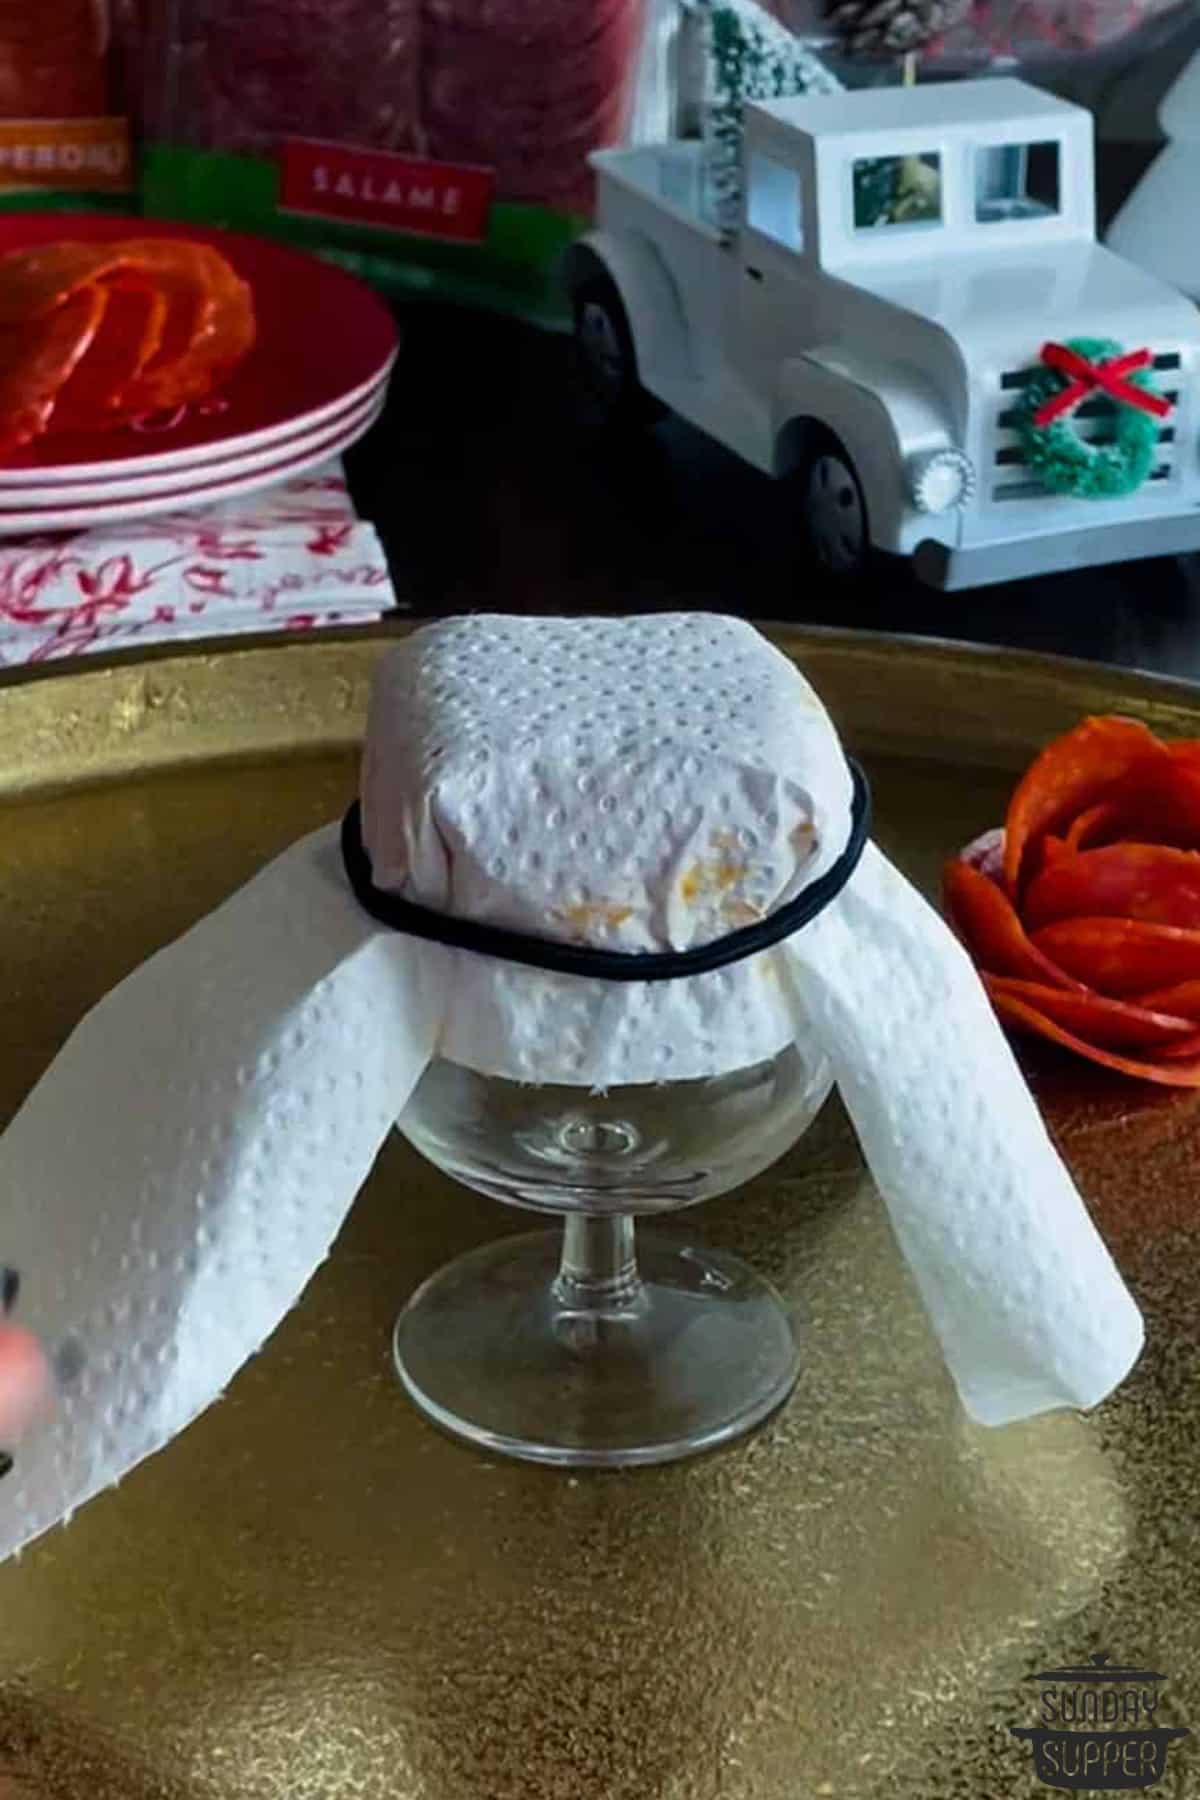 paper towel tied over a pepperoni meta flower on a glass